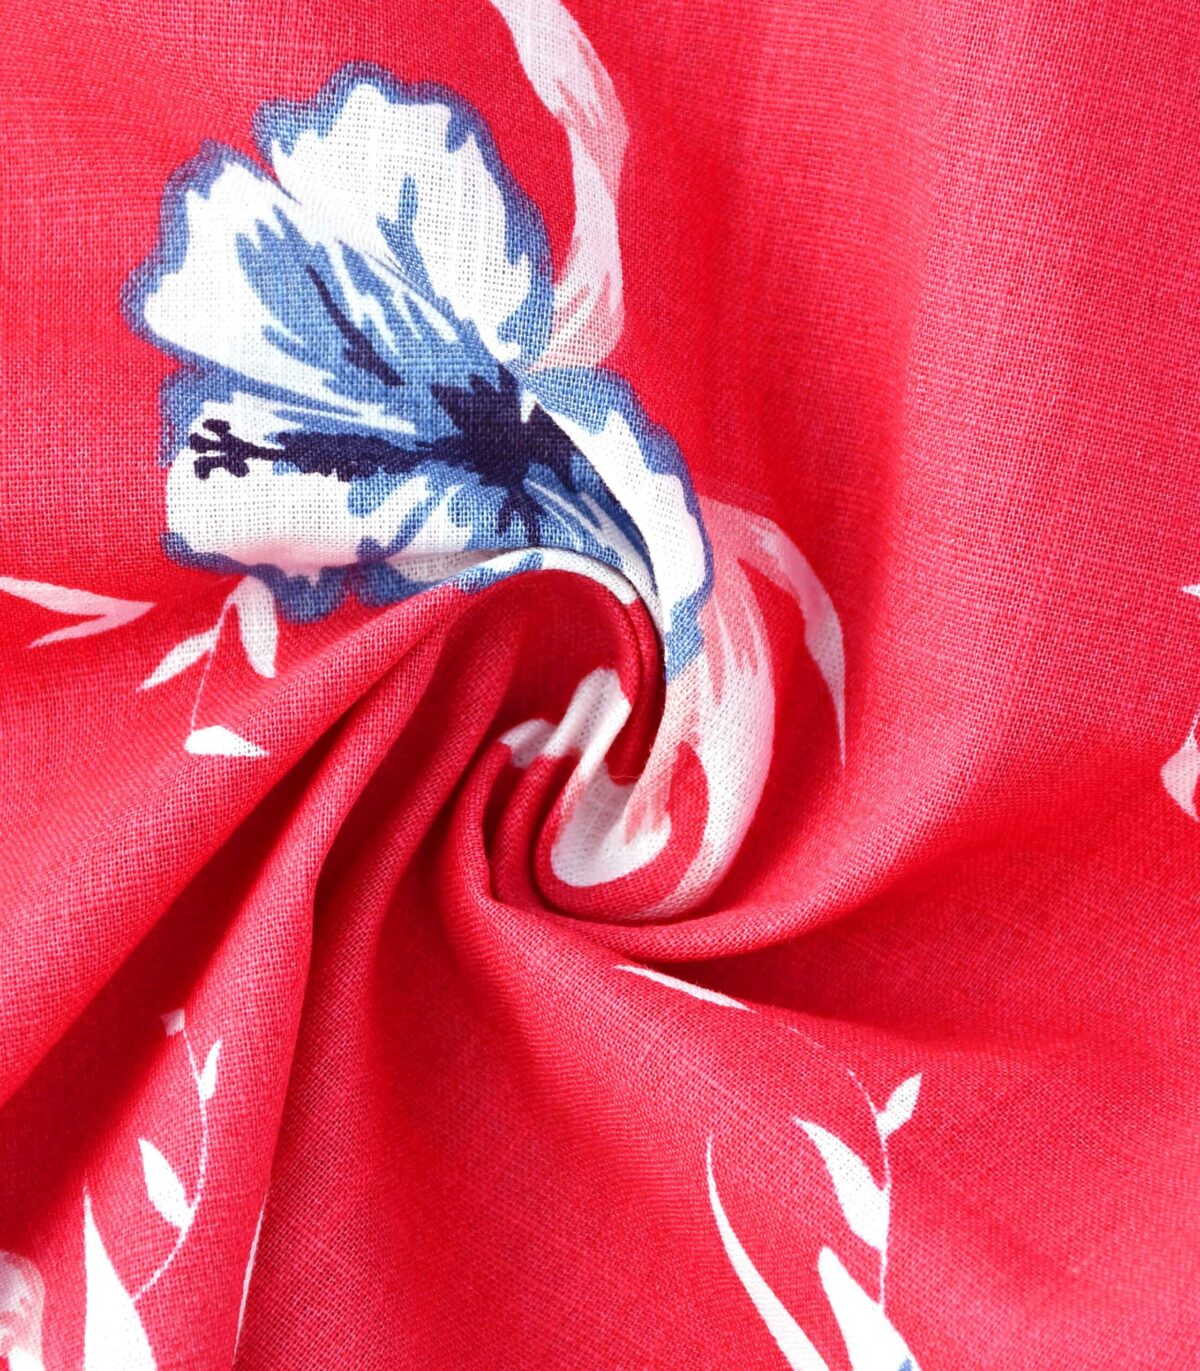 http://dineshexports.com/product/red-base-white-flower-print-fabric-fc-oa126/